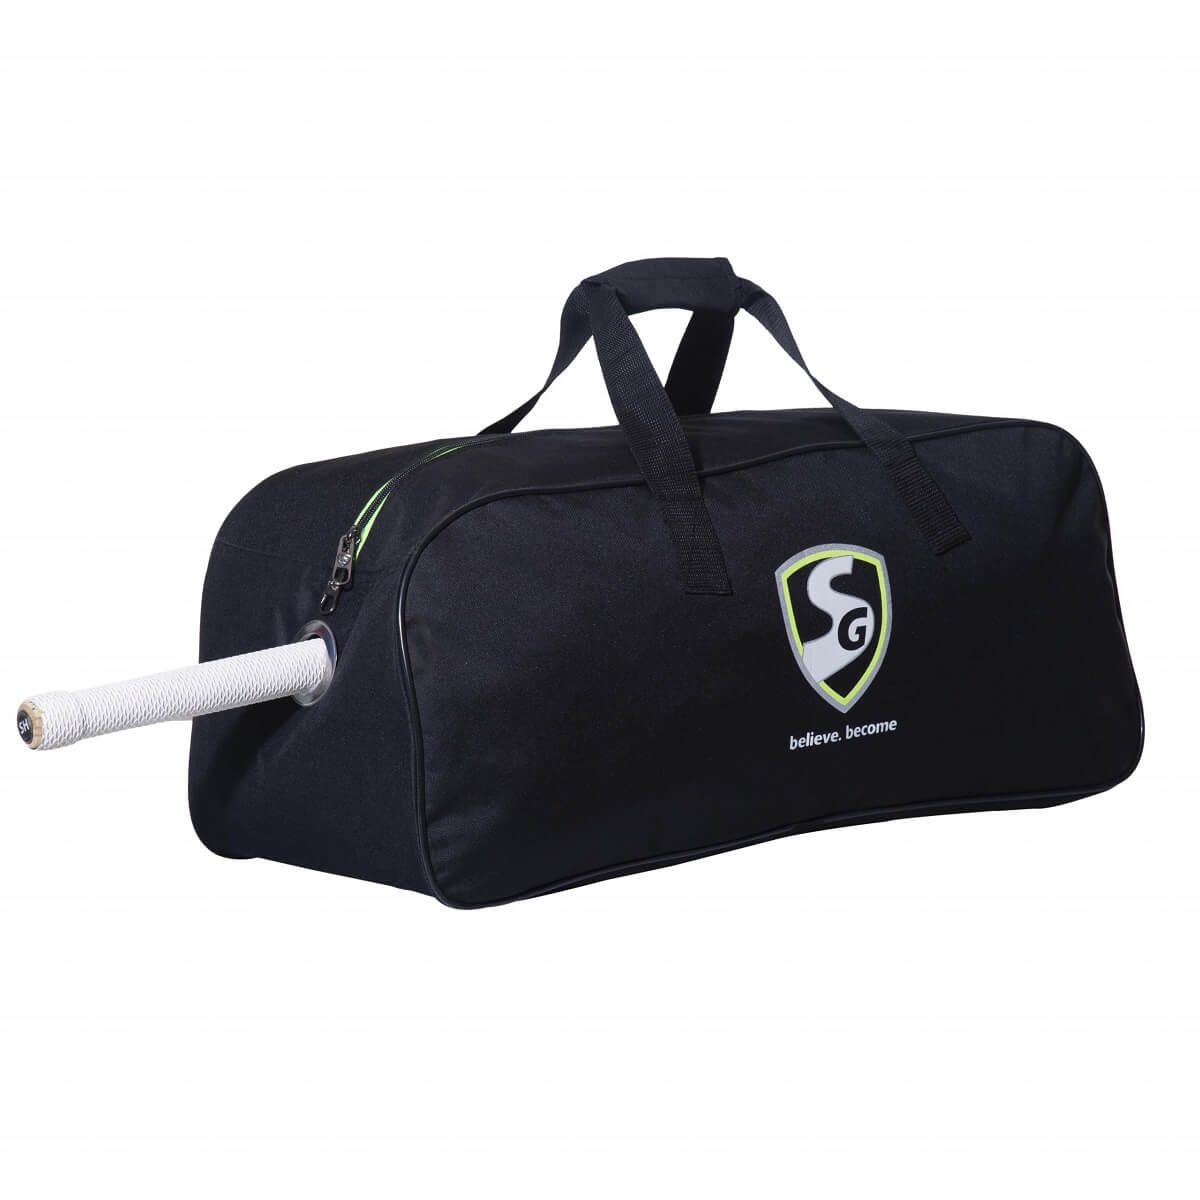 SG Cricket Kit Bag ACE Duffle : Amazon.in: Bags, Wallets and Luggage